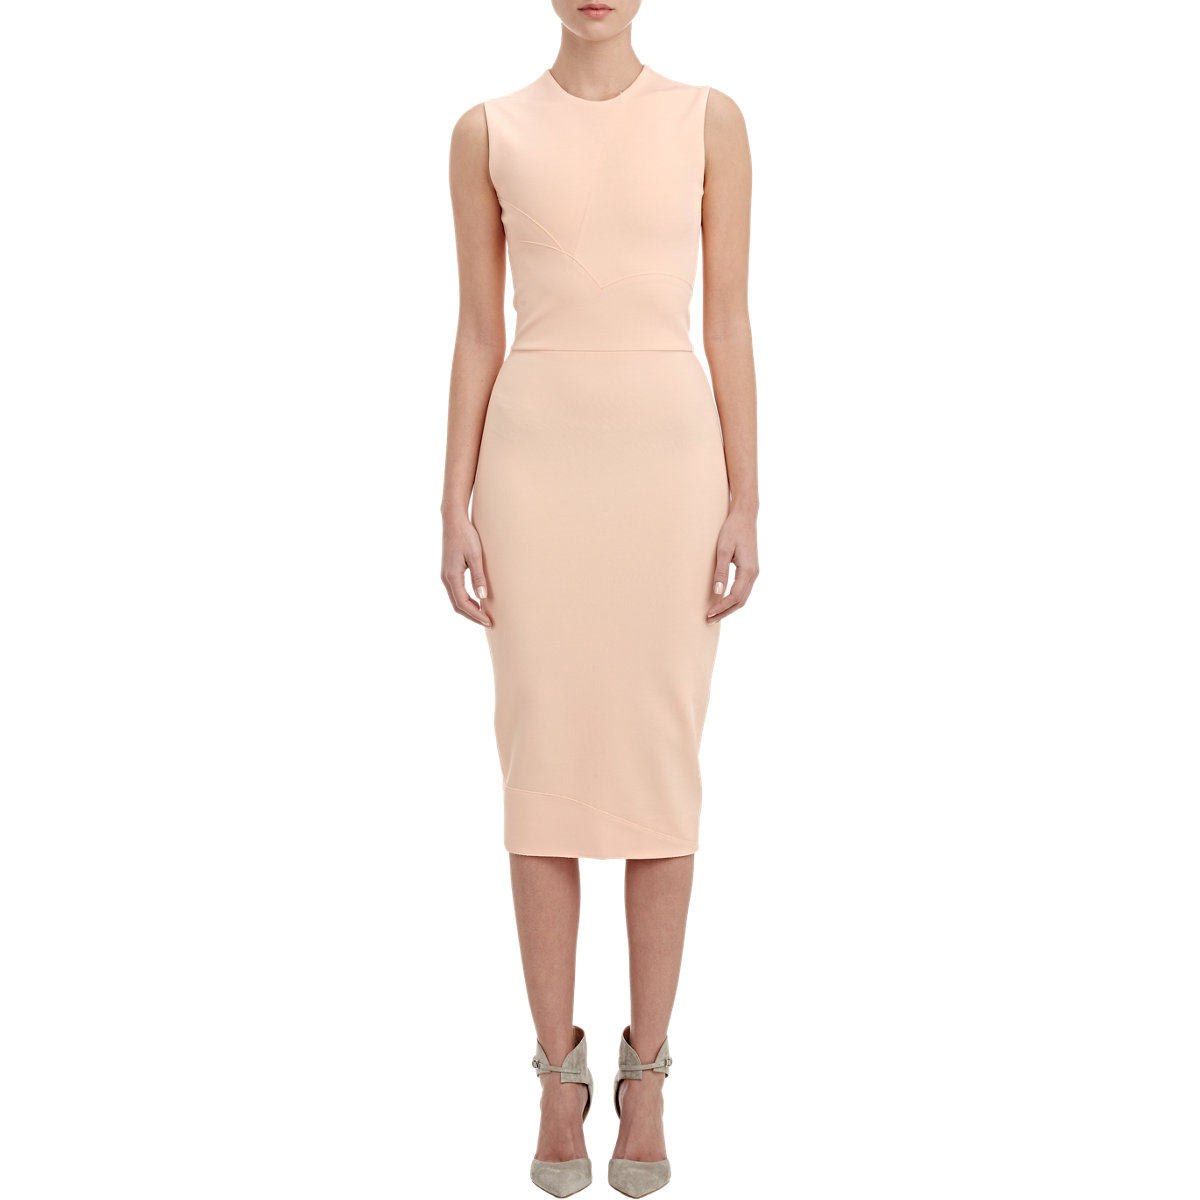 Victoria beckham Compact Knit Sheath Dress in Pink | Lyst